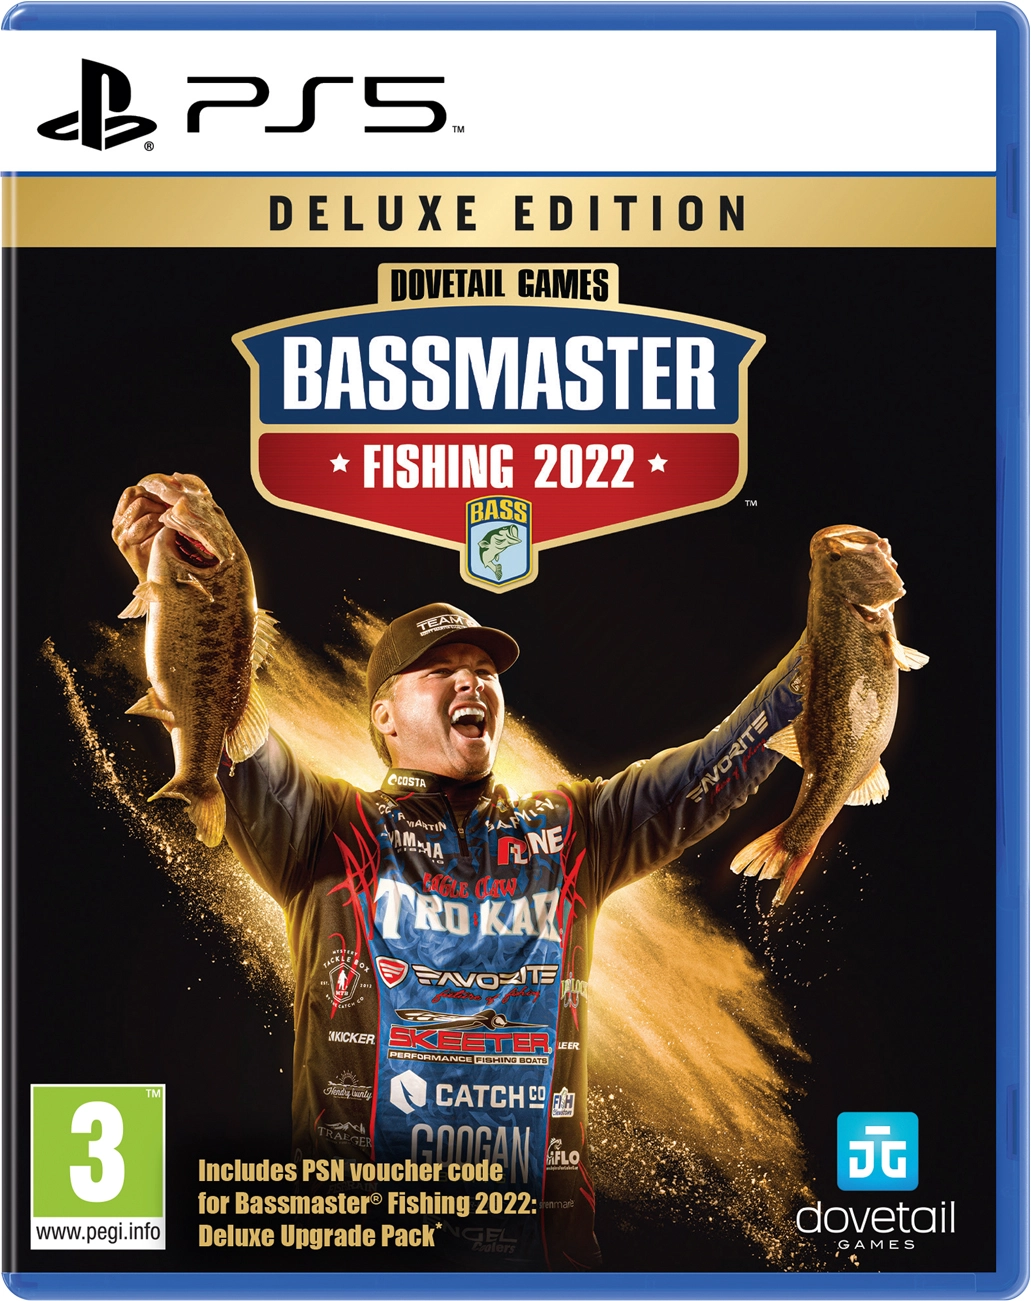 Bassmaster Fishing 2022 - Deluxe Edition (PS5), Dovetail Games